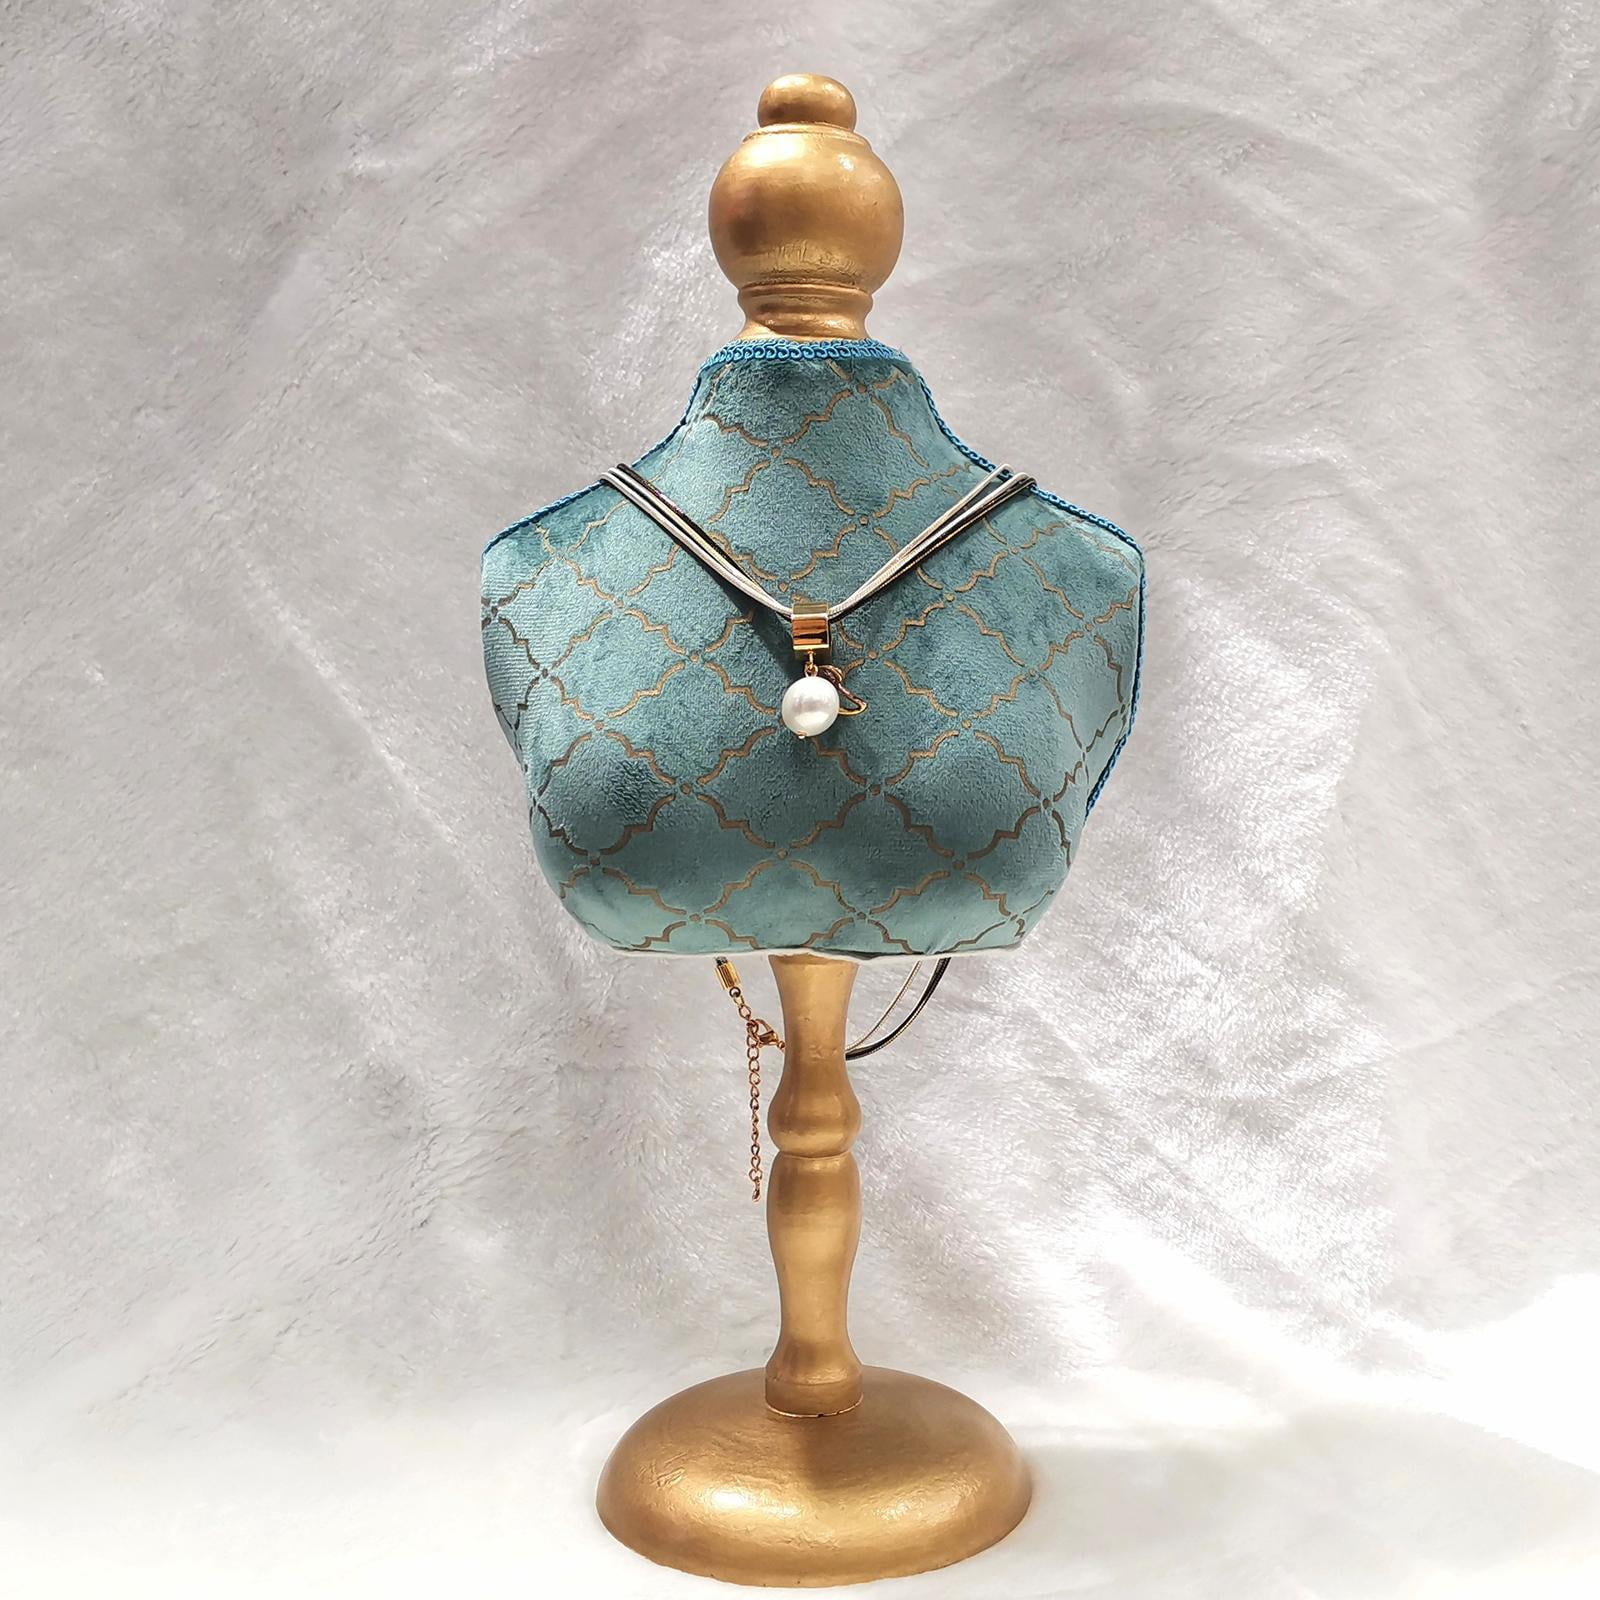 Fashion Necklace Display Stand Necklace Mannequin Holder Stand Displaying  and Storing Jewelry Bust Stand for Show Selling Photograph Prop 